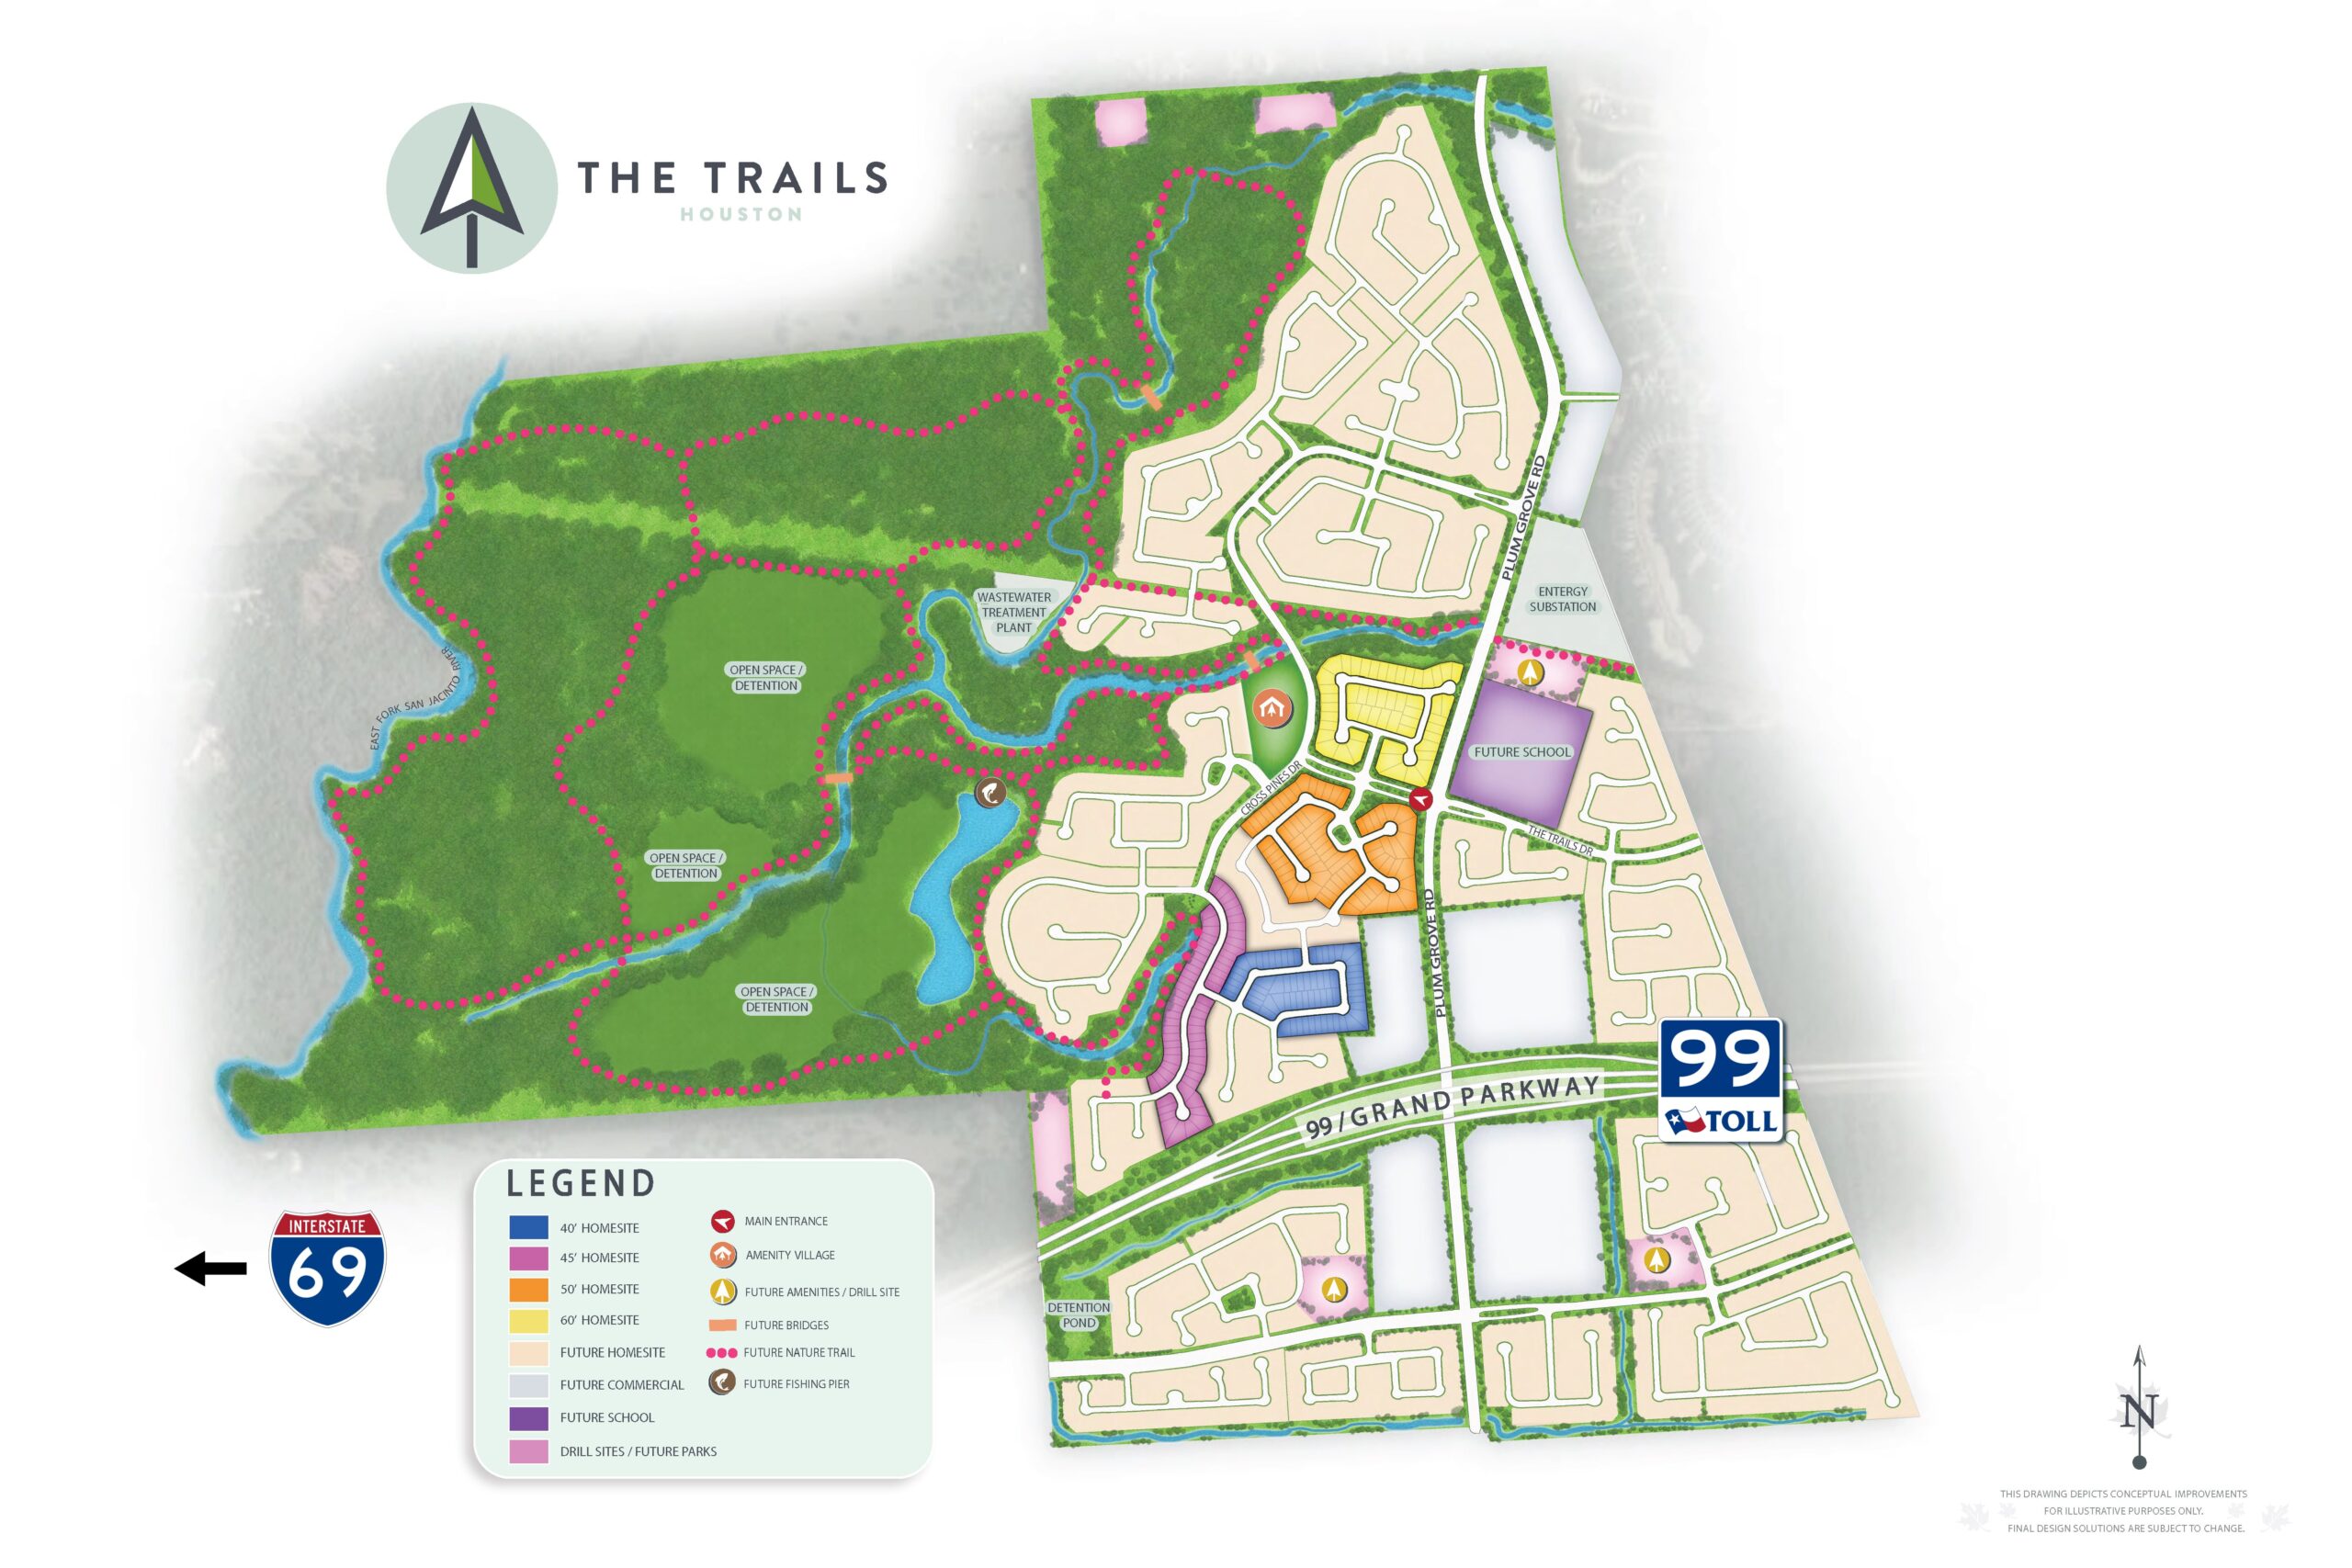 new home community site plan - The Trails site plan